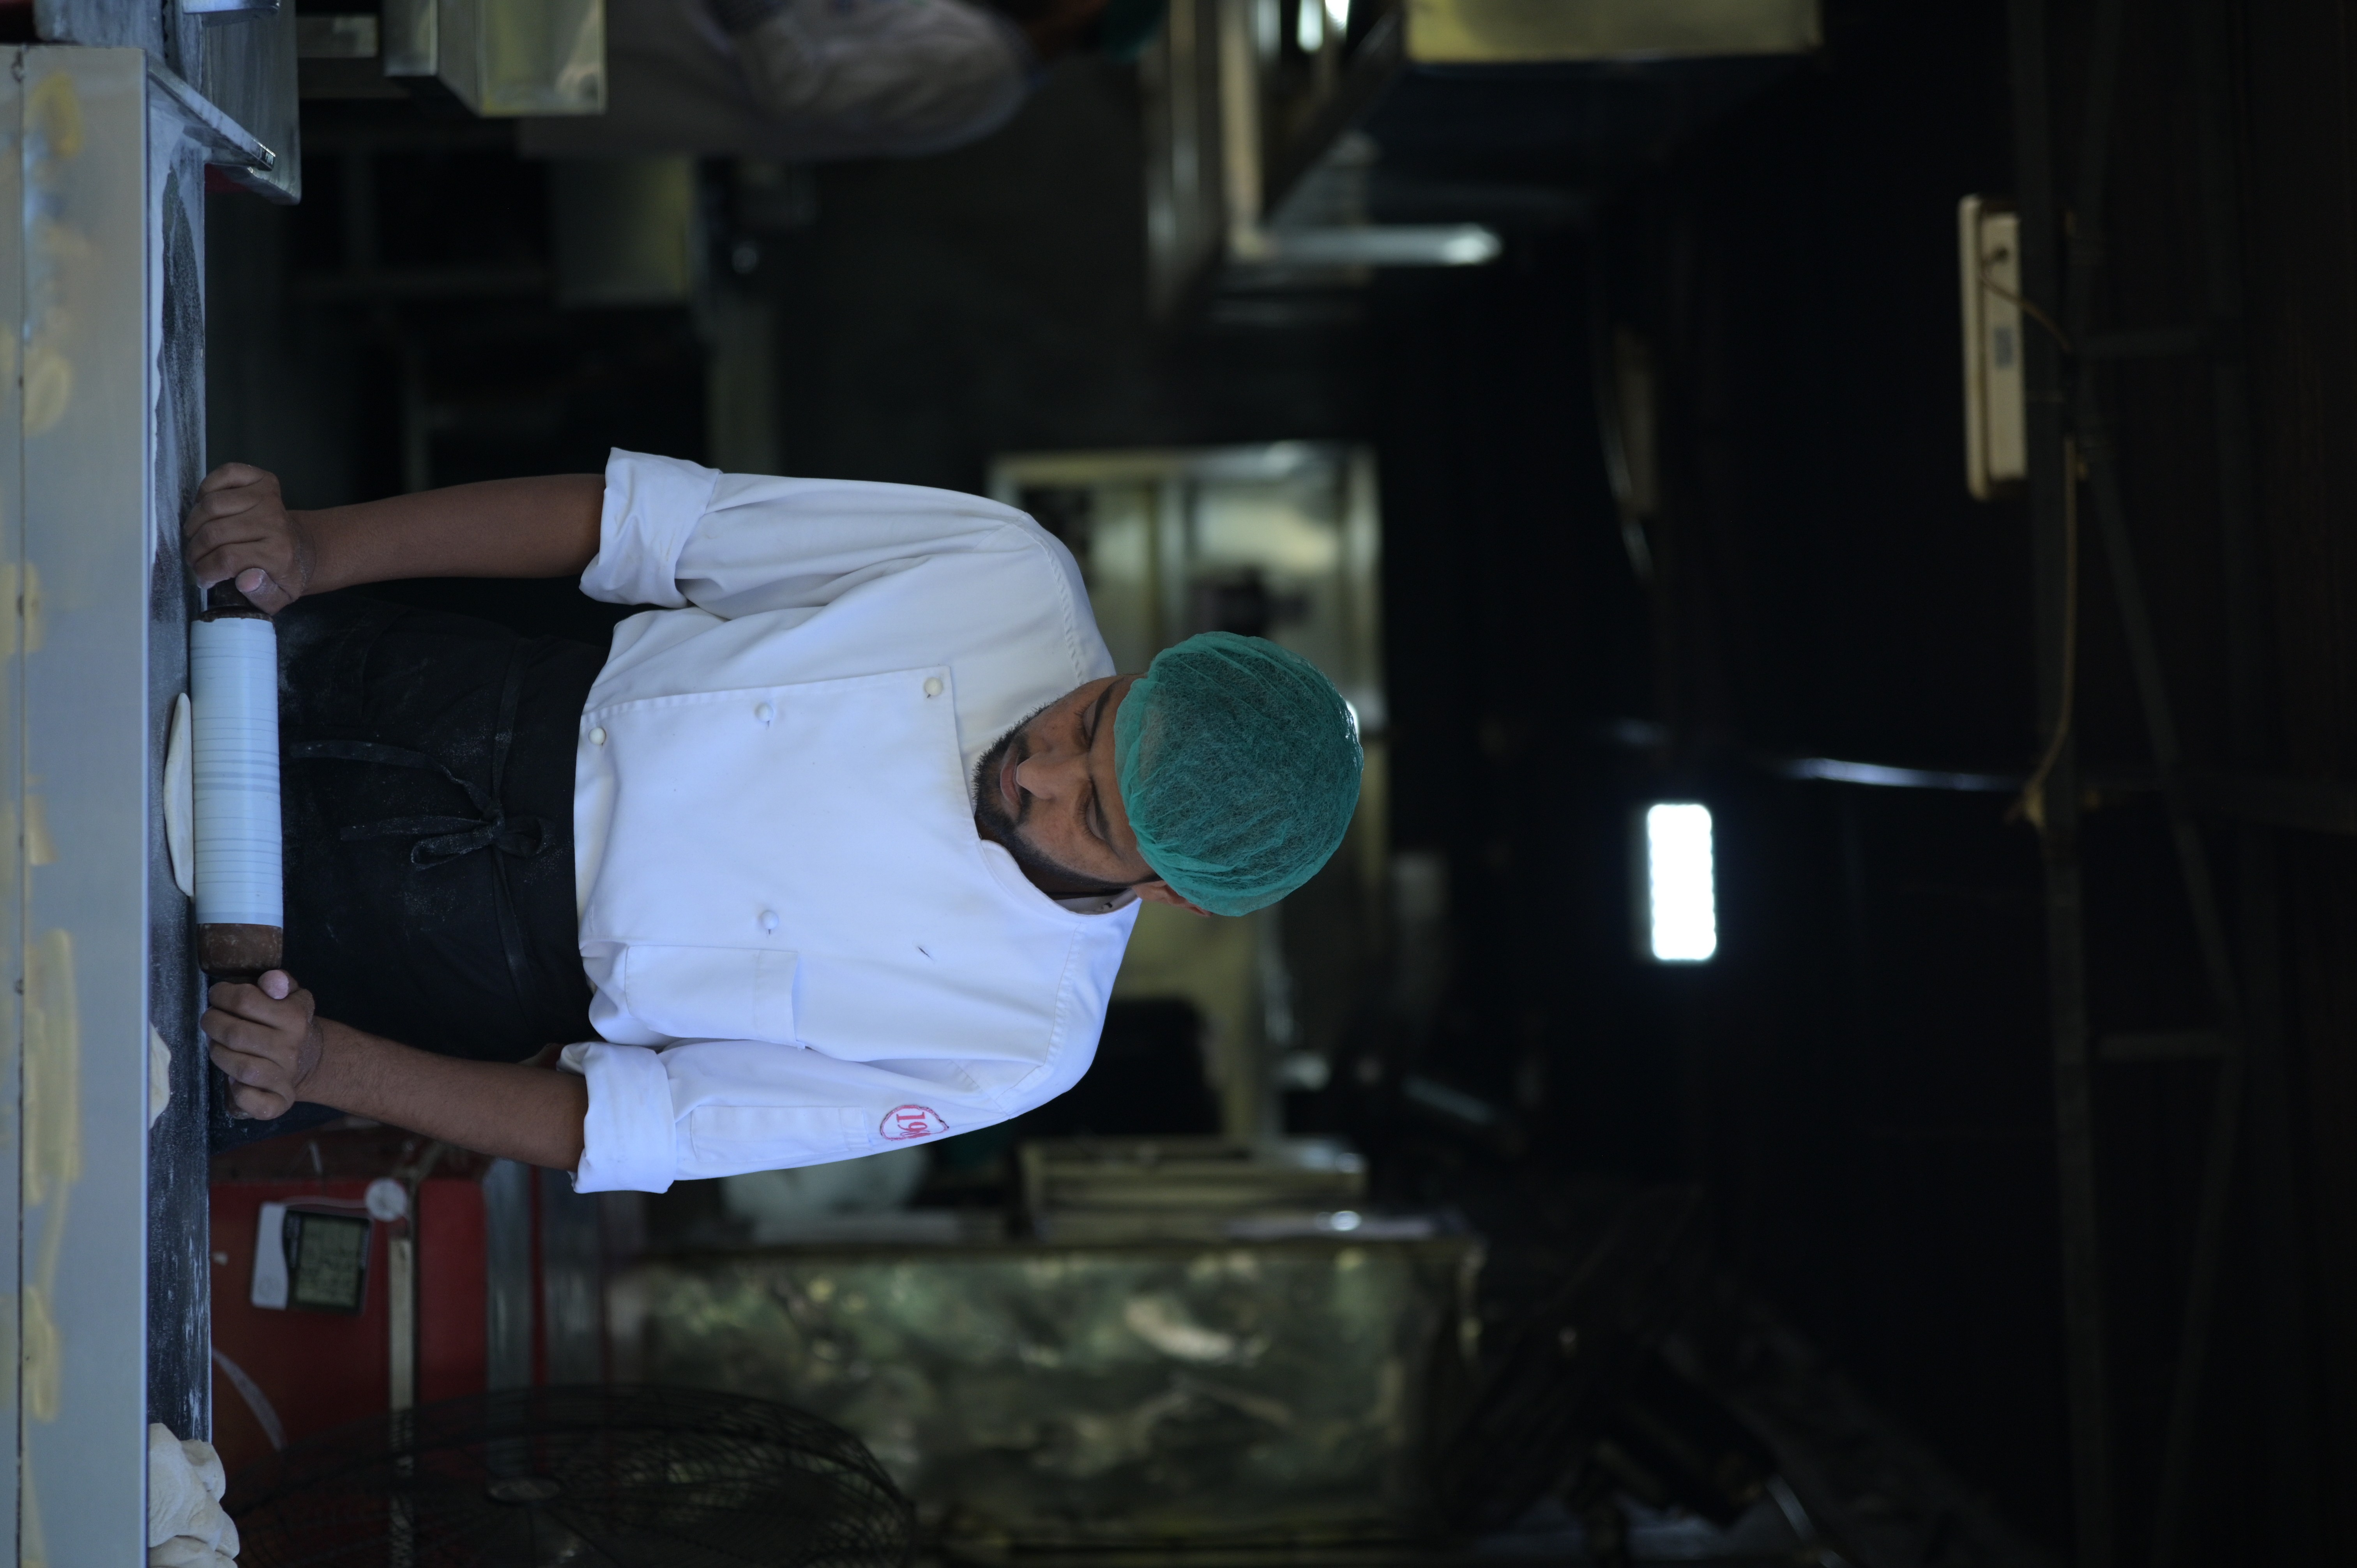 A man making naan (flatbread) which is leavened, oven-baked or taw